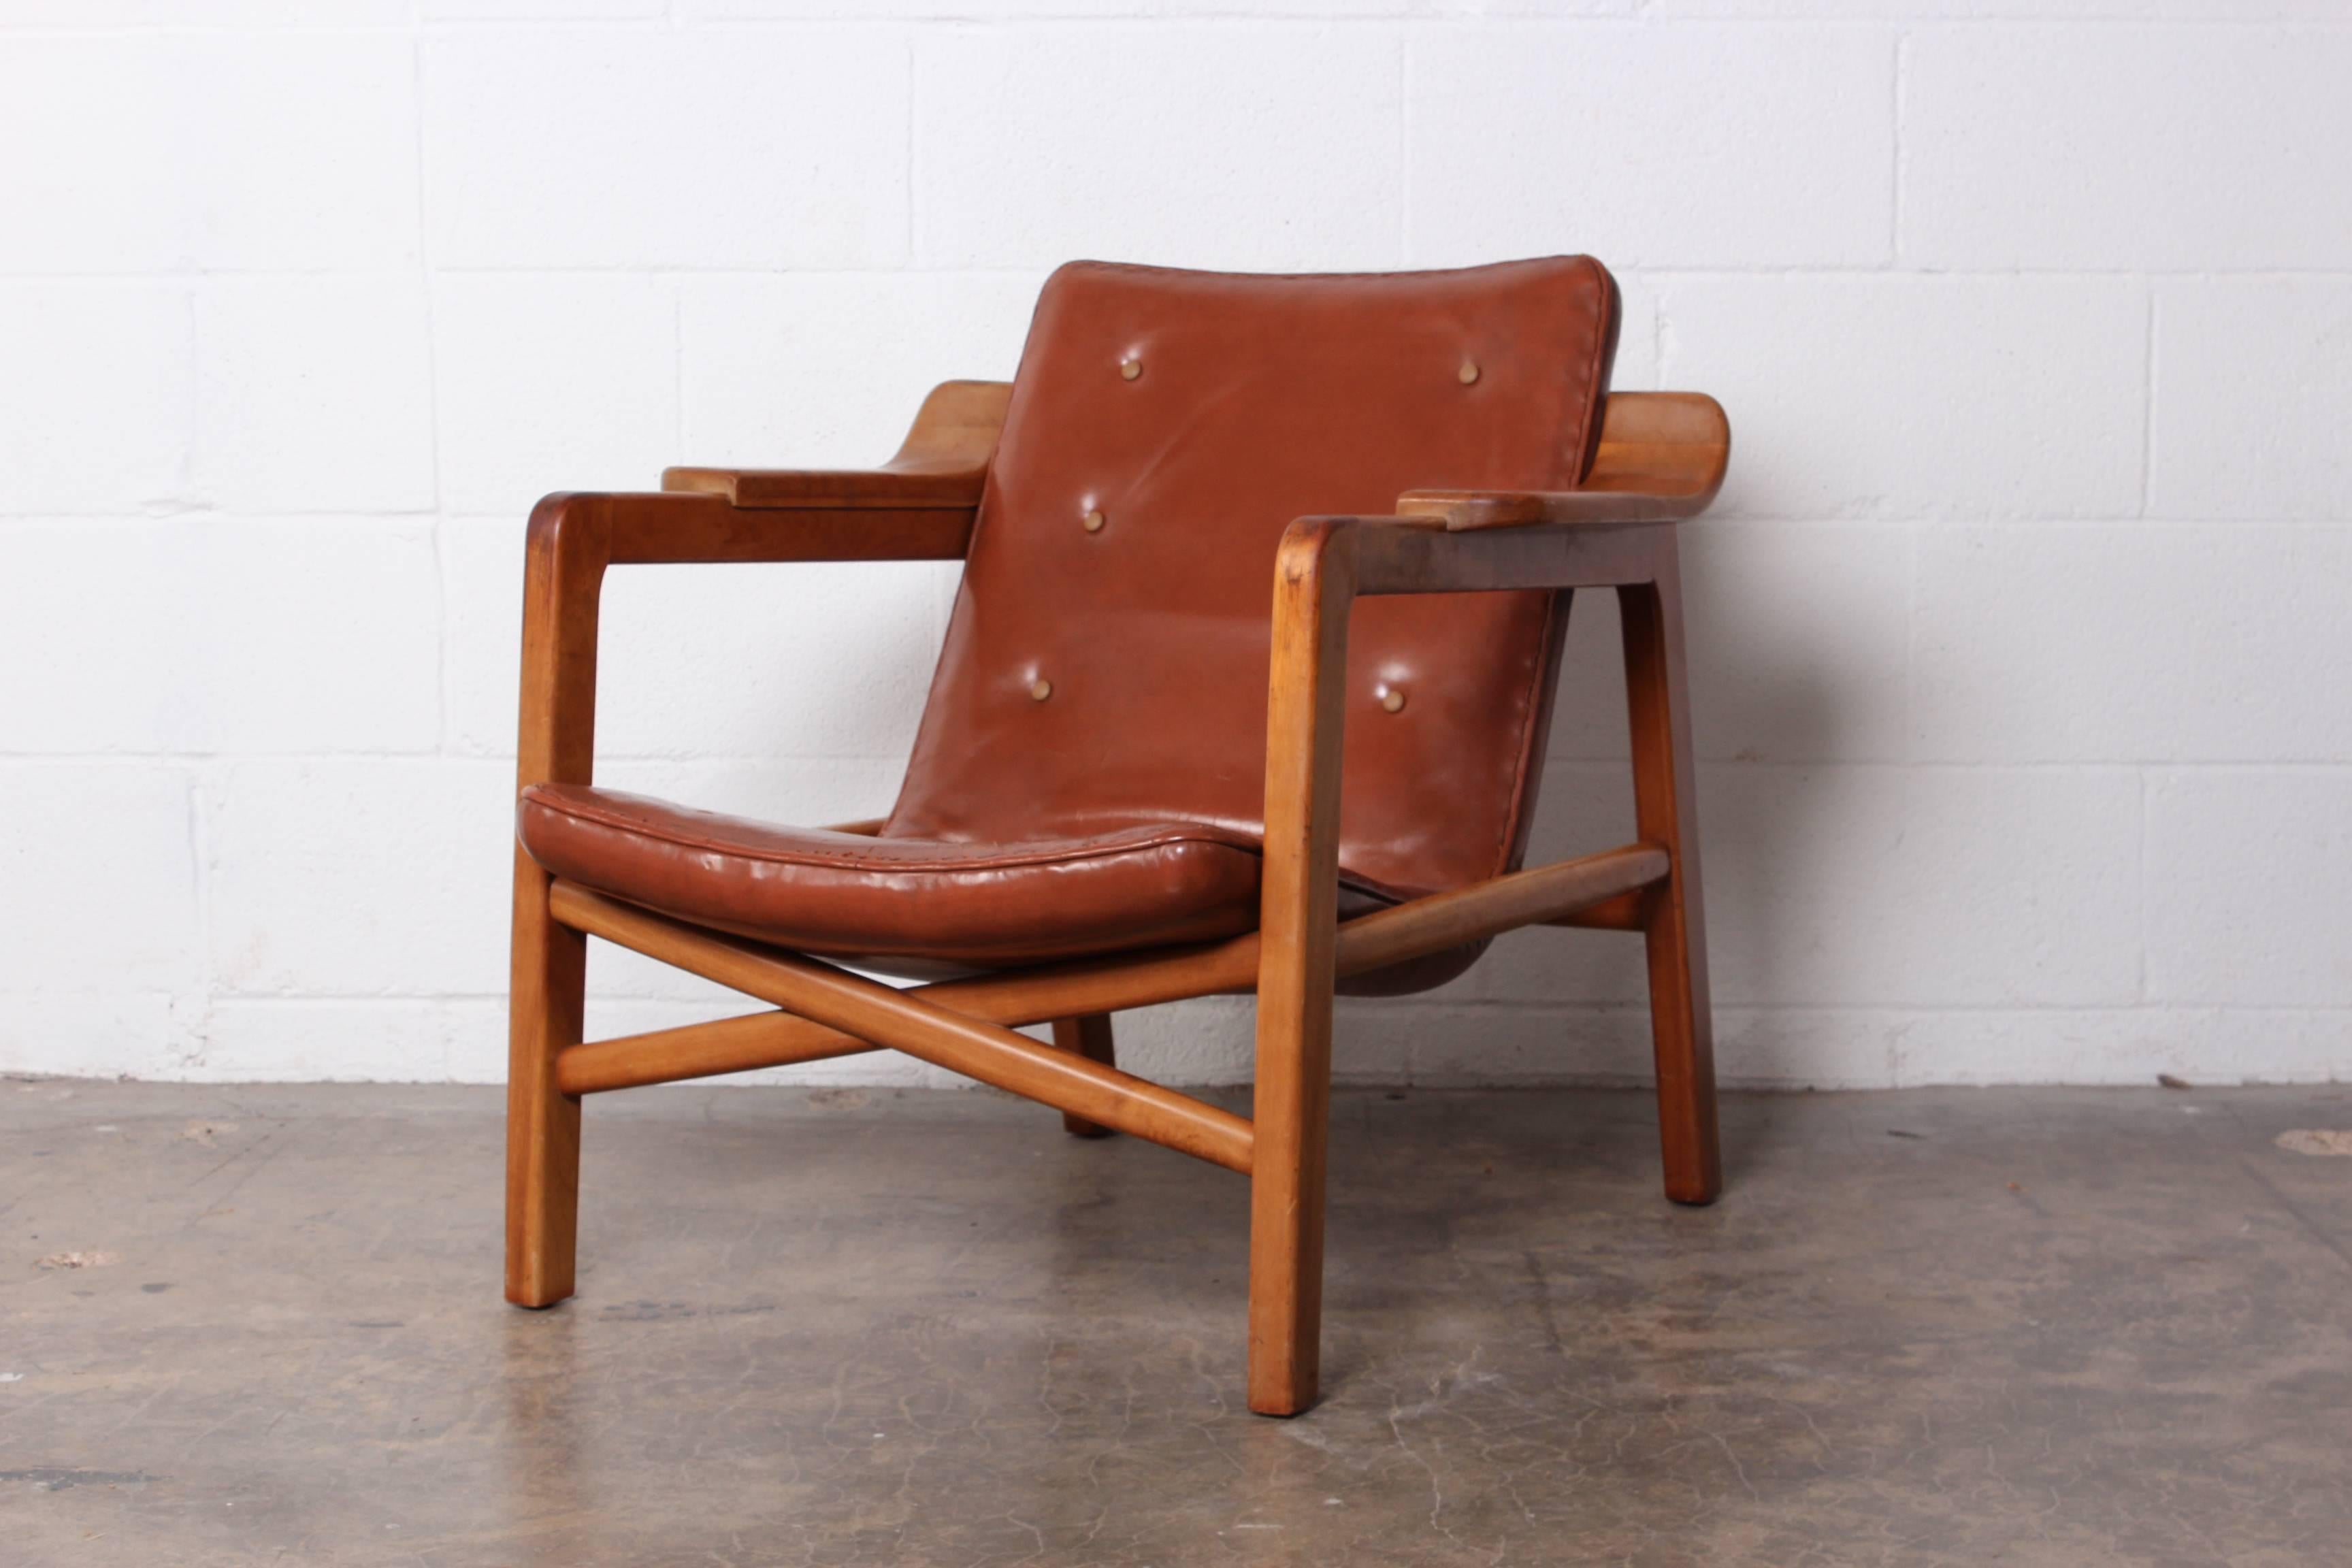 Tove & Edvard Kindt-Larsen 'Fireplace' Lounge Chair in Original Leather 1